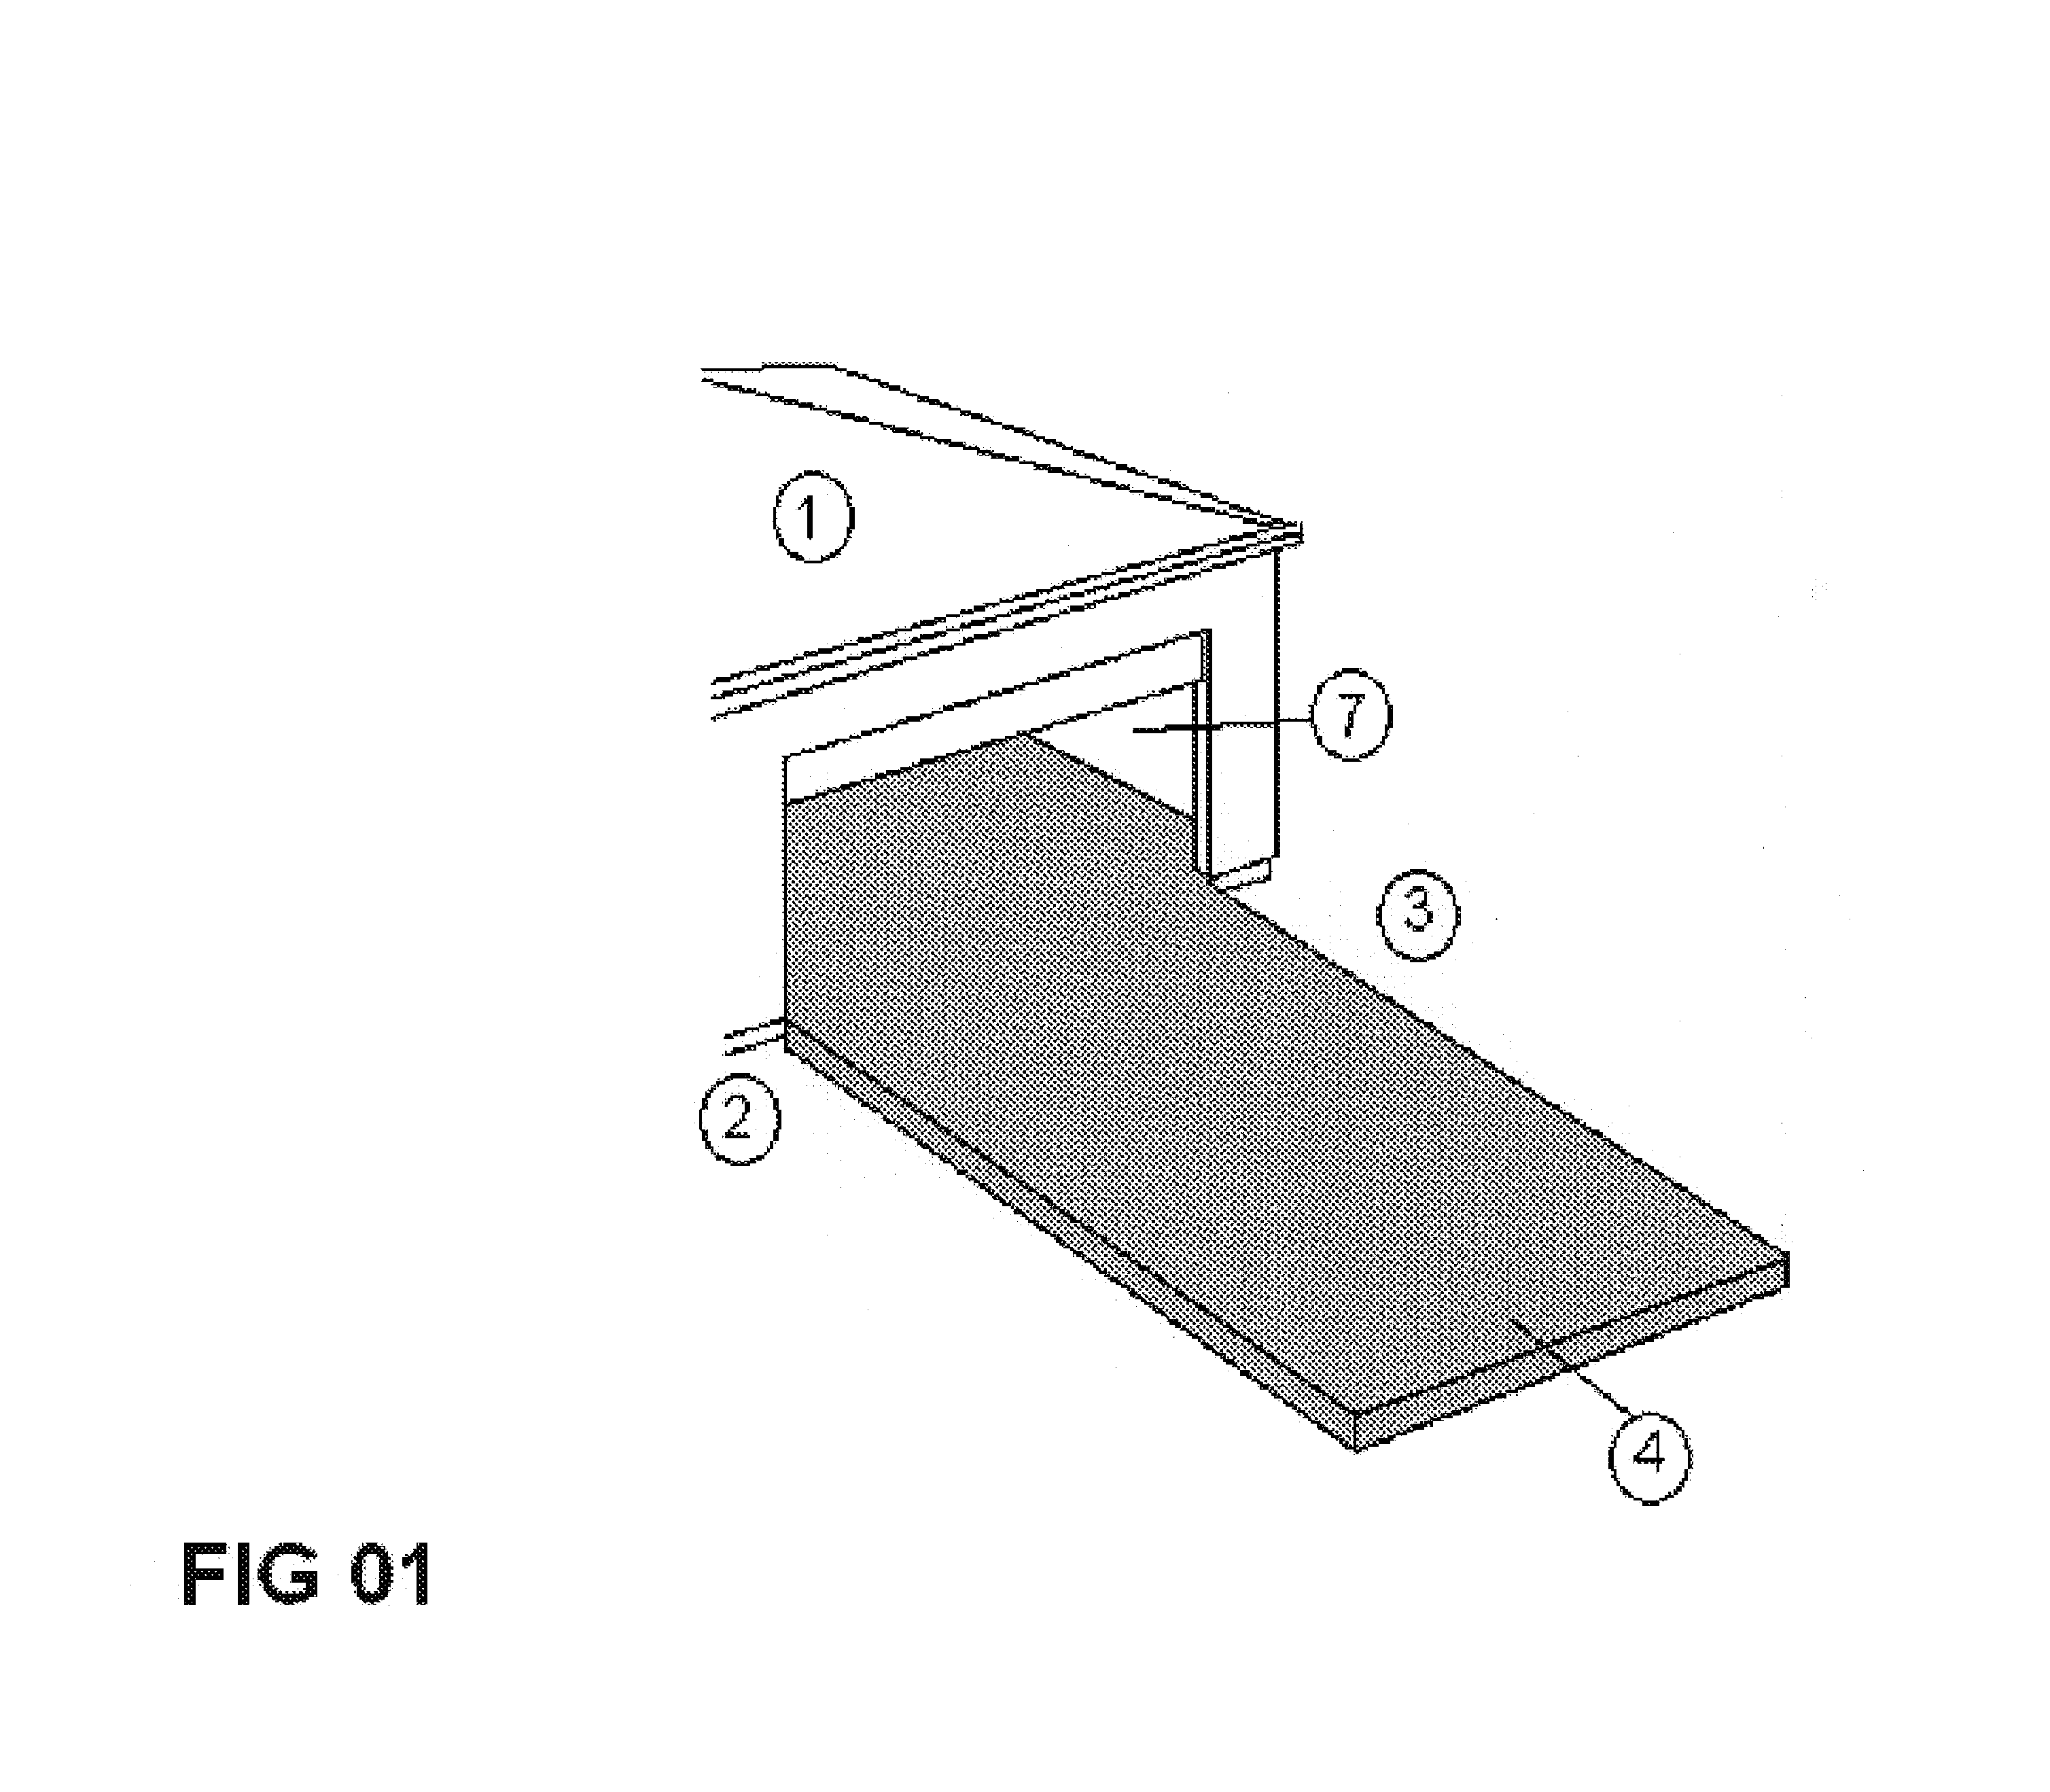 Deployment system for thermal radiating materials